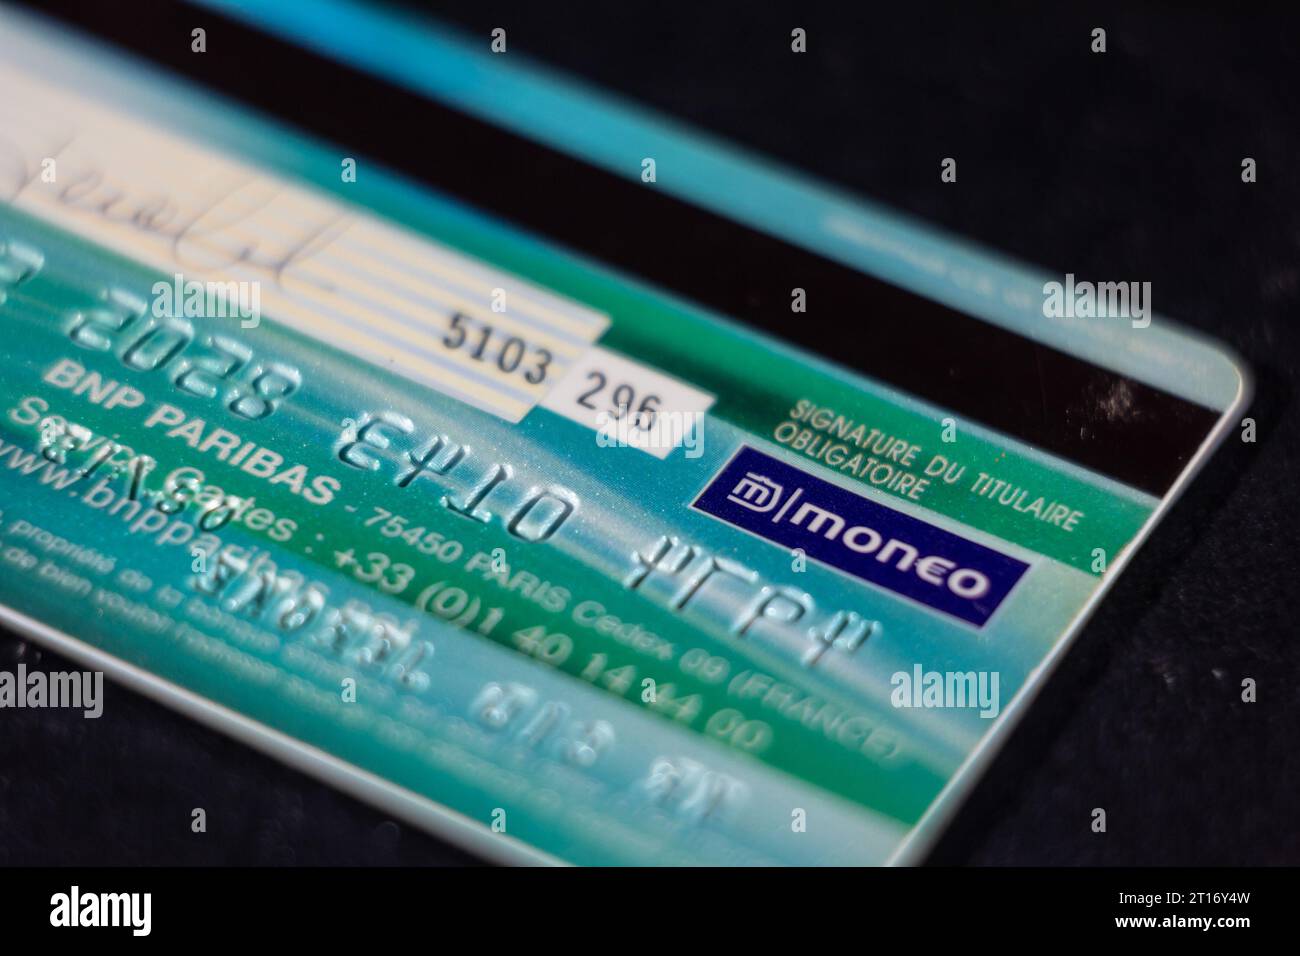 picture of an old french banking card with the logo of moneo moneo sometimes branded as mono is an electronic purse system available on french ban 2T16Y4W